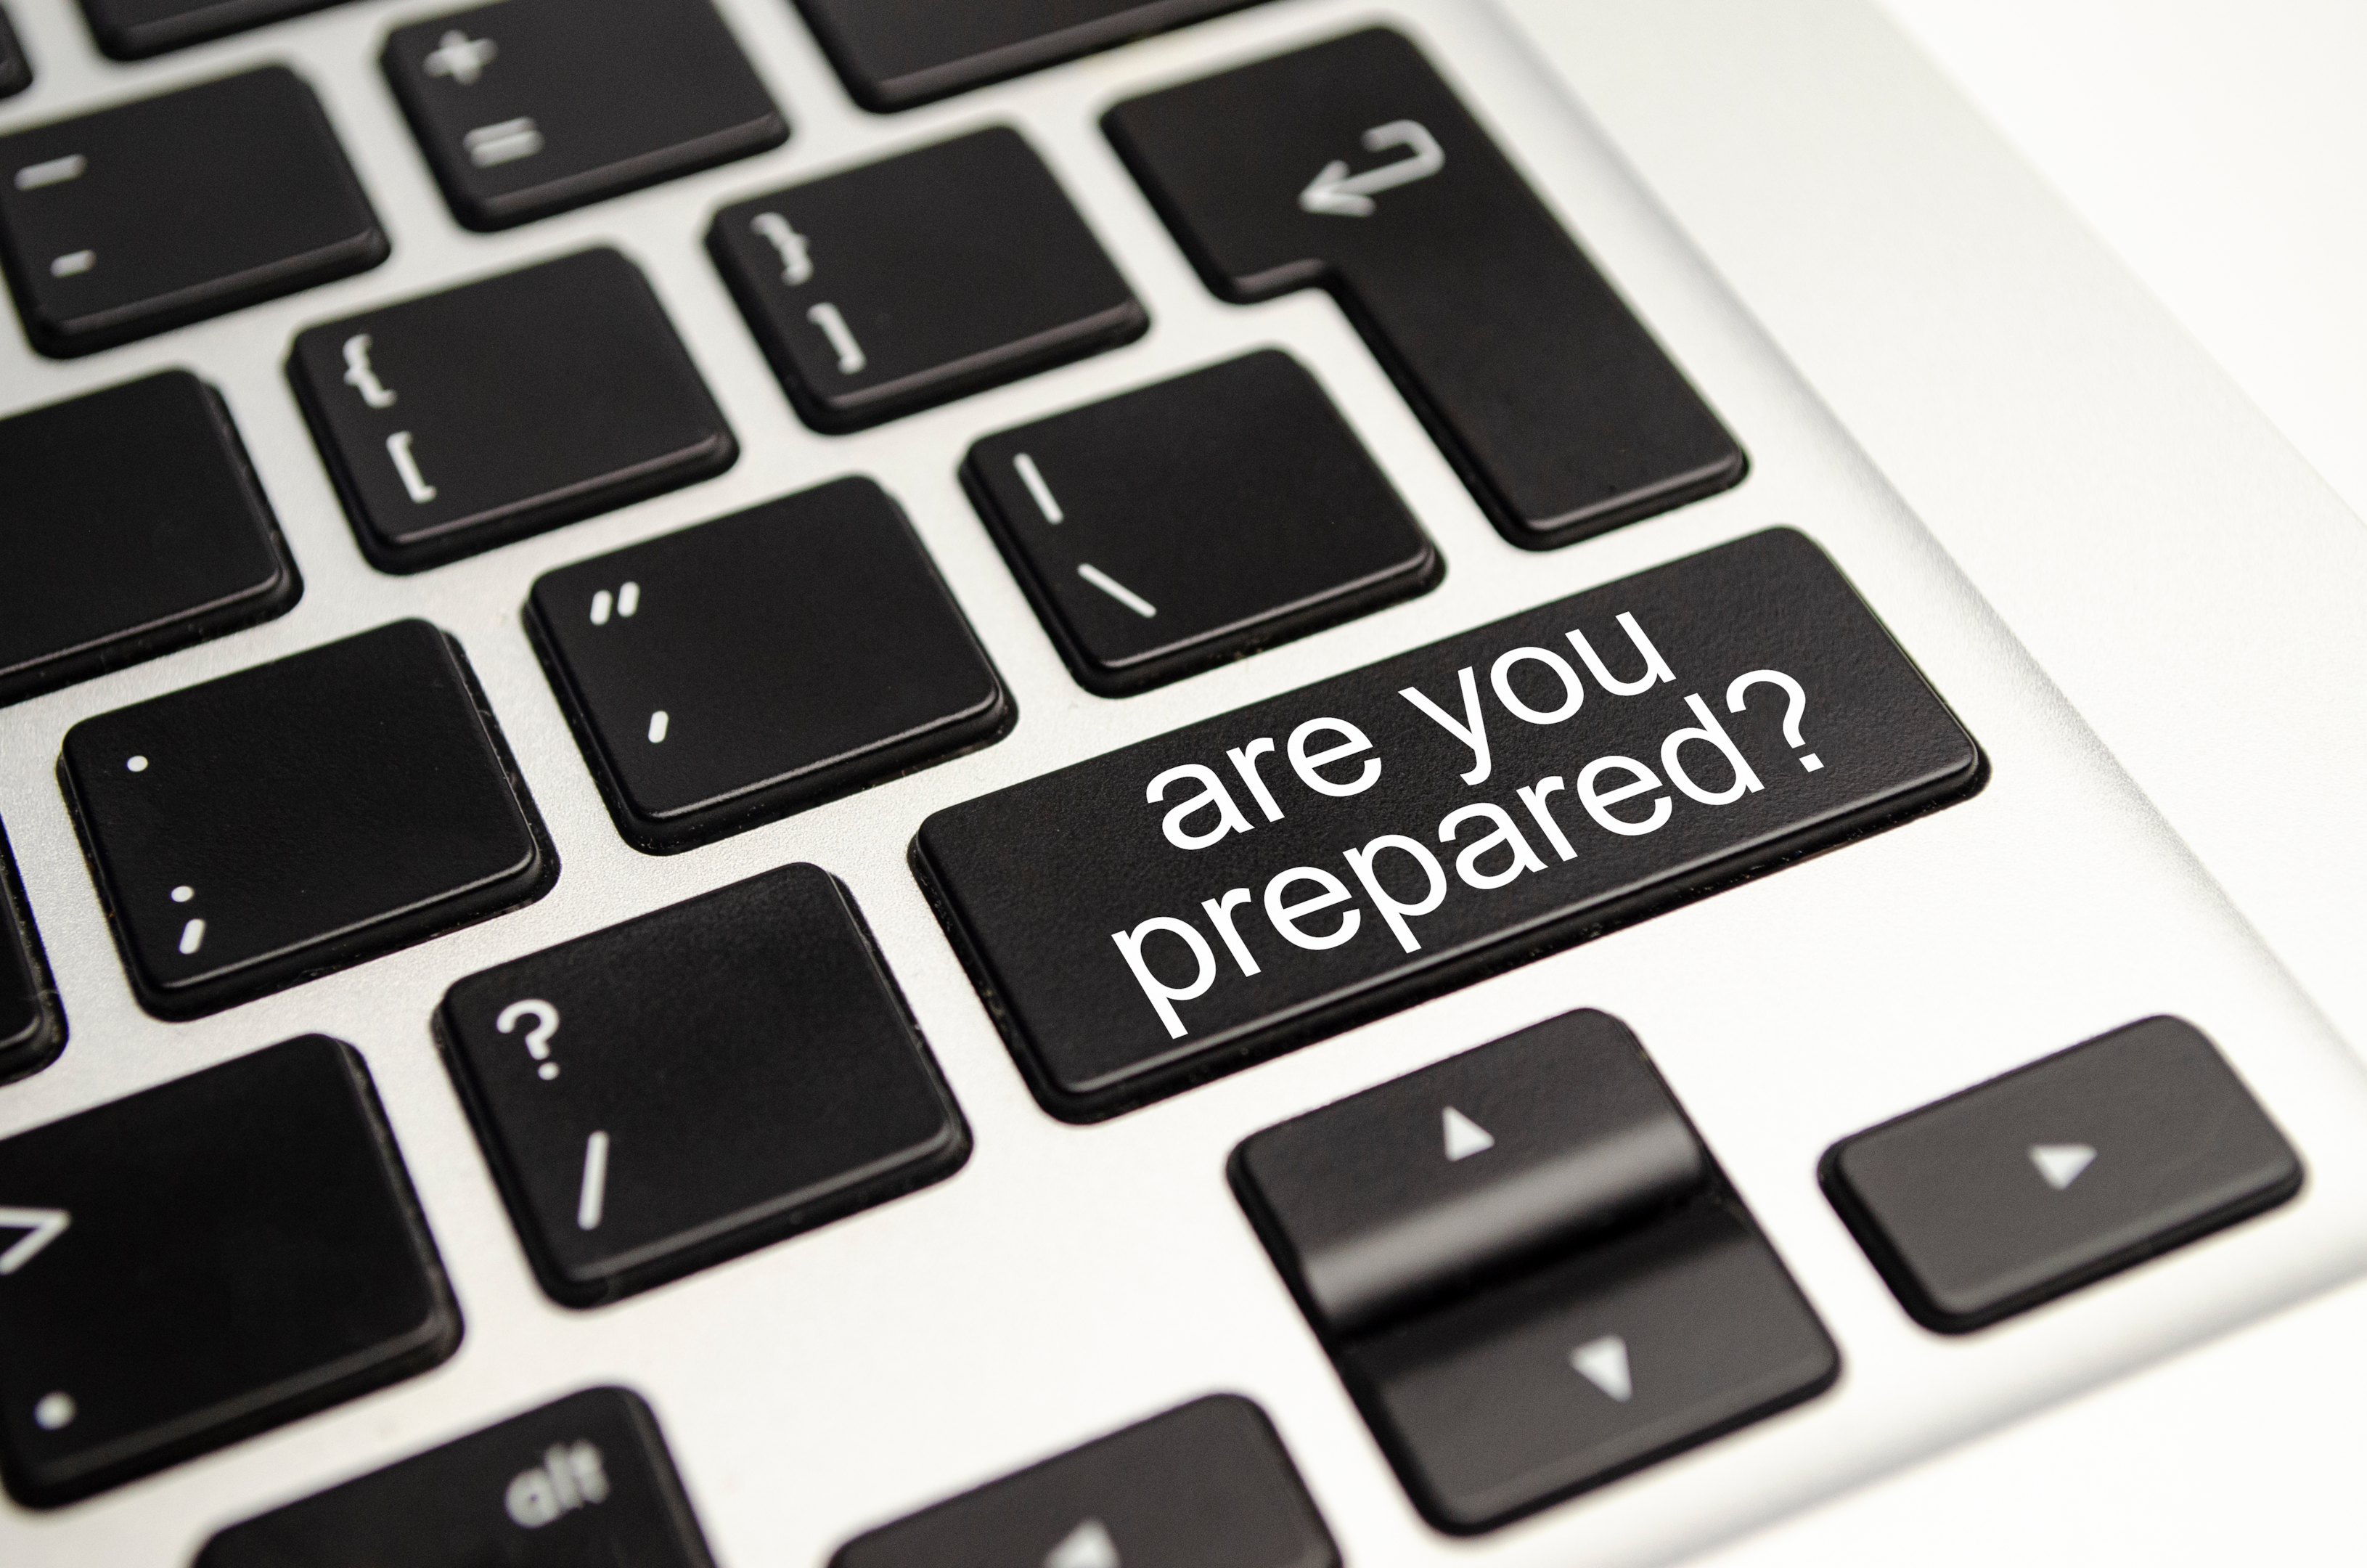 black keys on silver laptop; one key reads "are you prepared?"